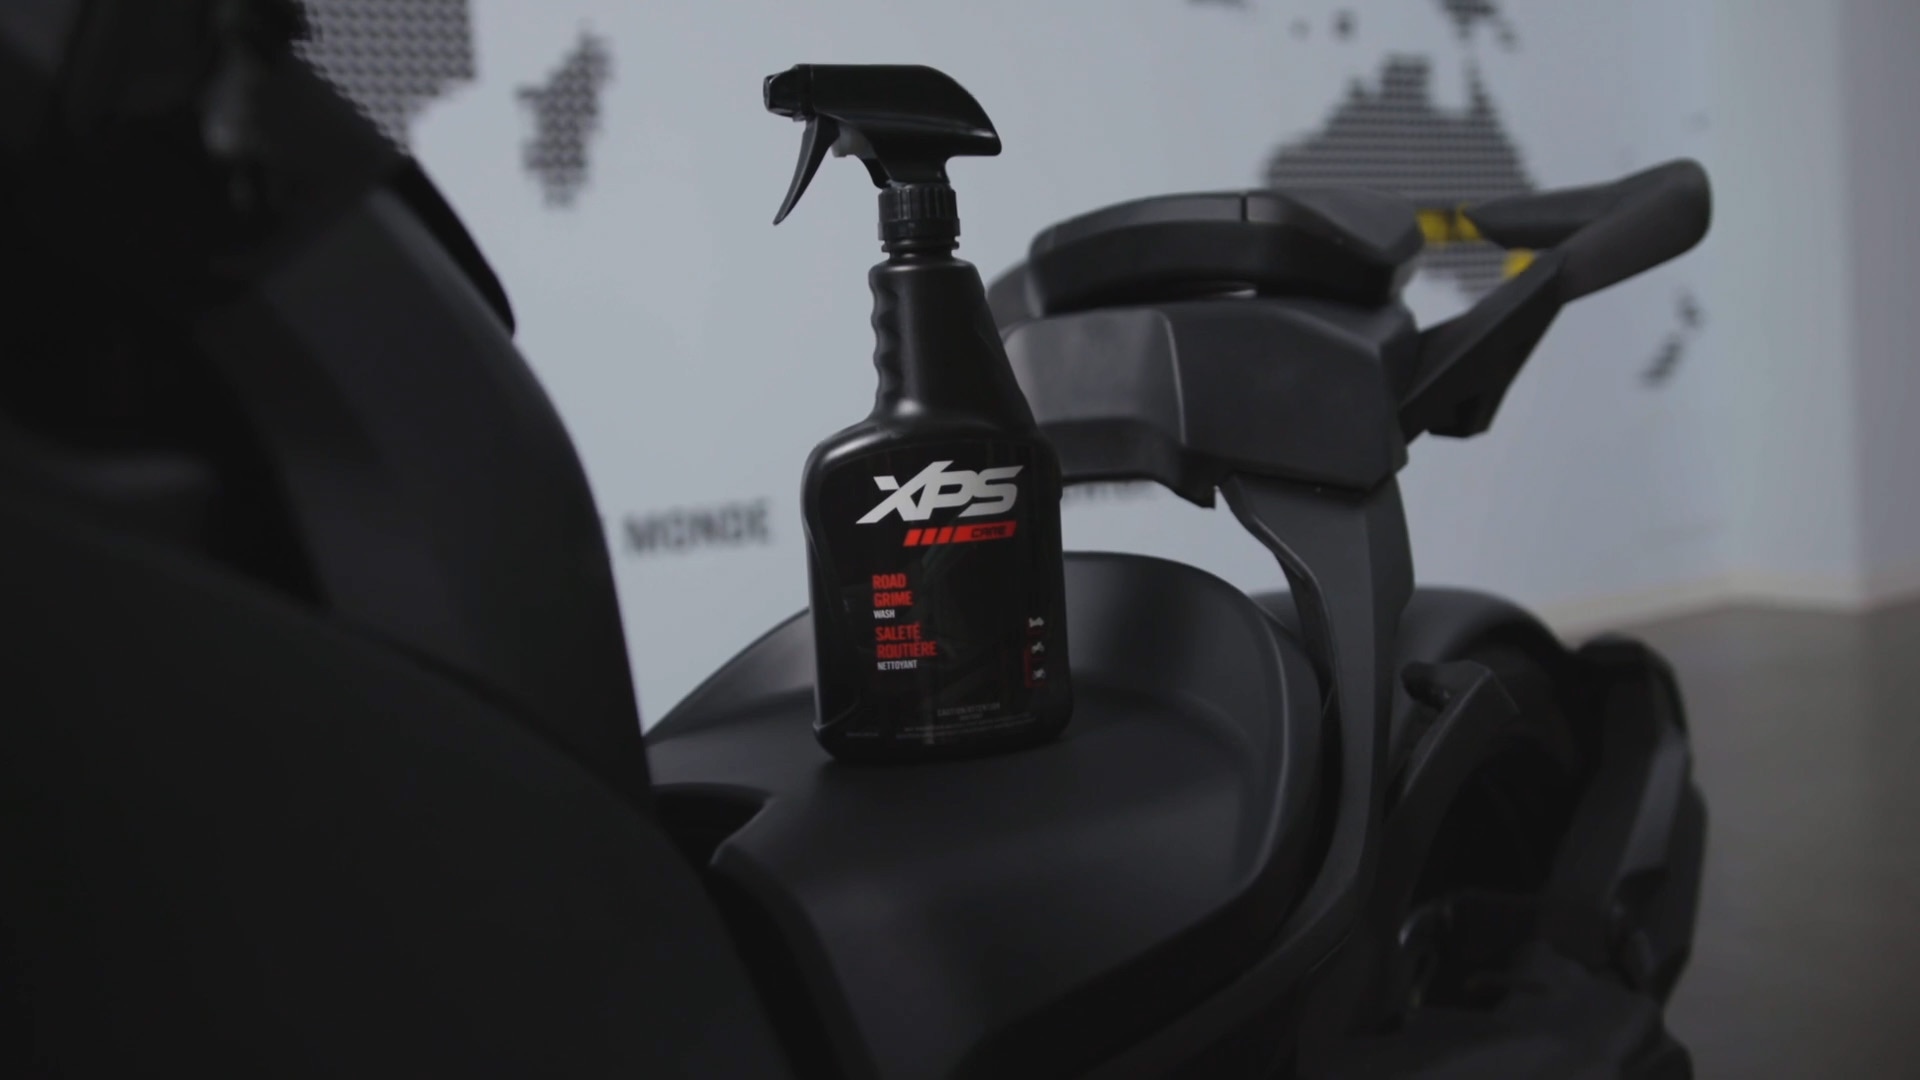 A bottle of XPS product on the seat of a Can-Am